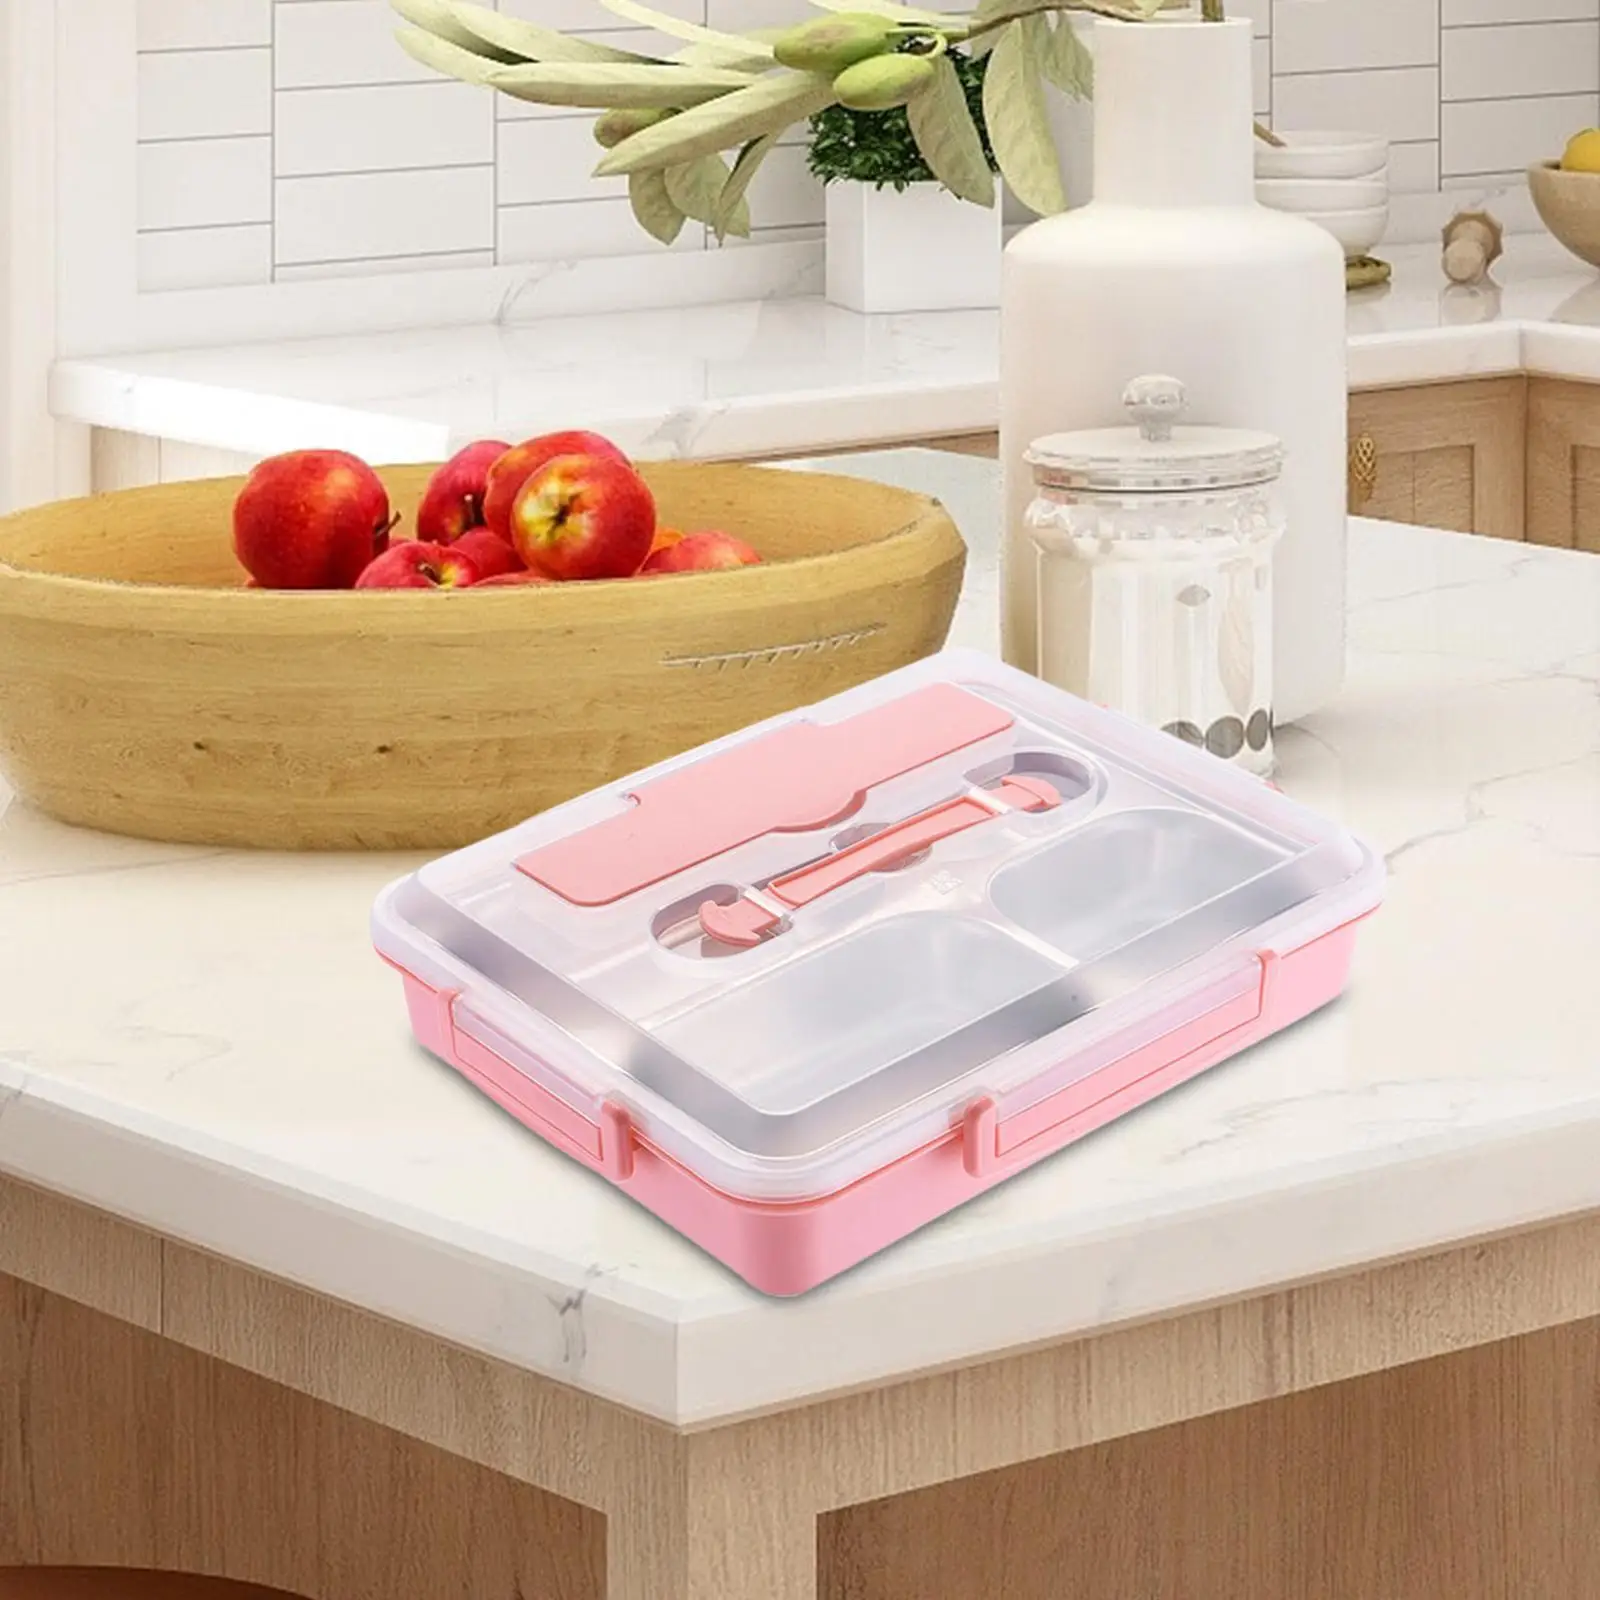 Bento lunch box Portable Hot Water Heating Stainless steel Leakproof for Car Truck Traveling Picnics Home